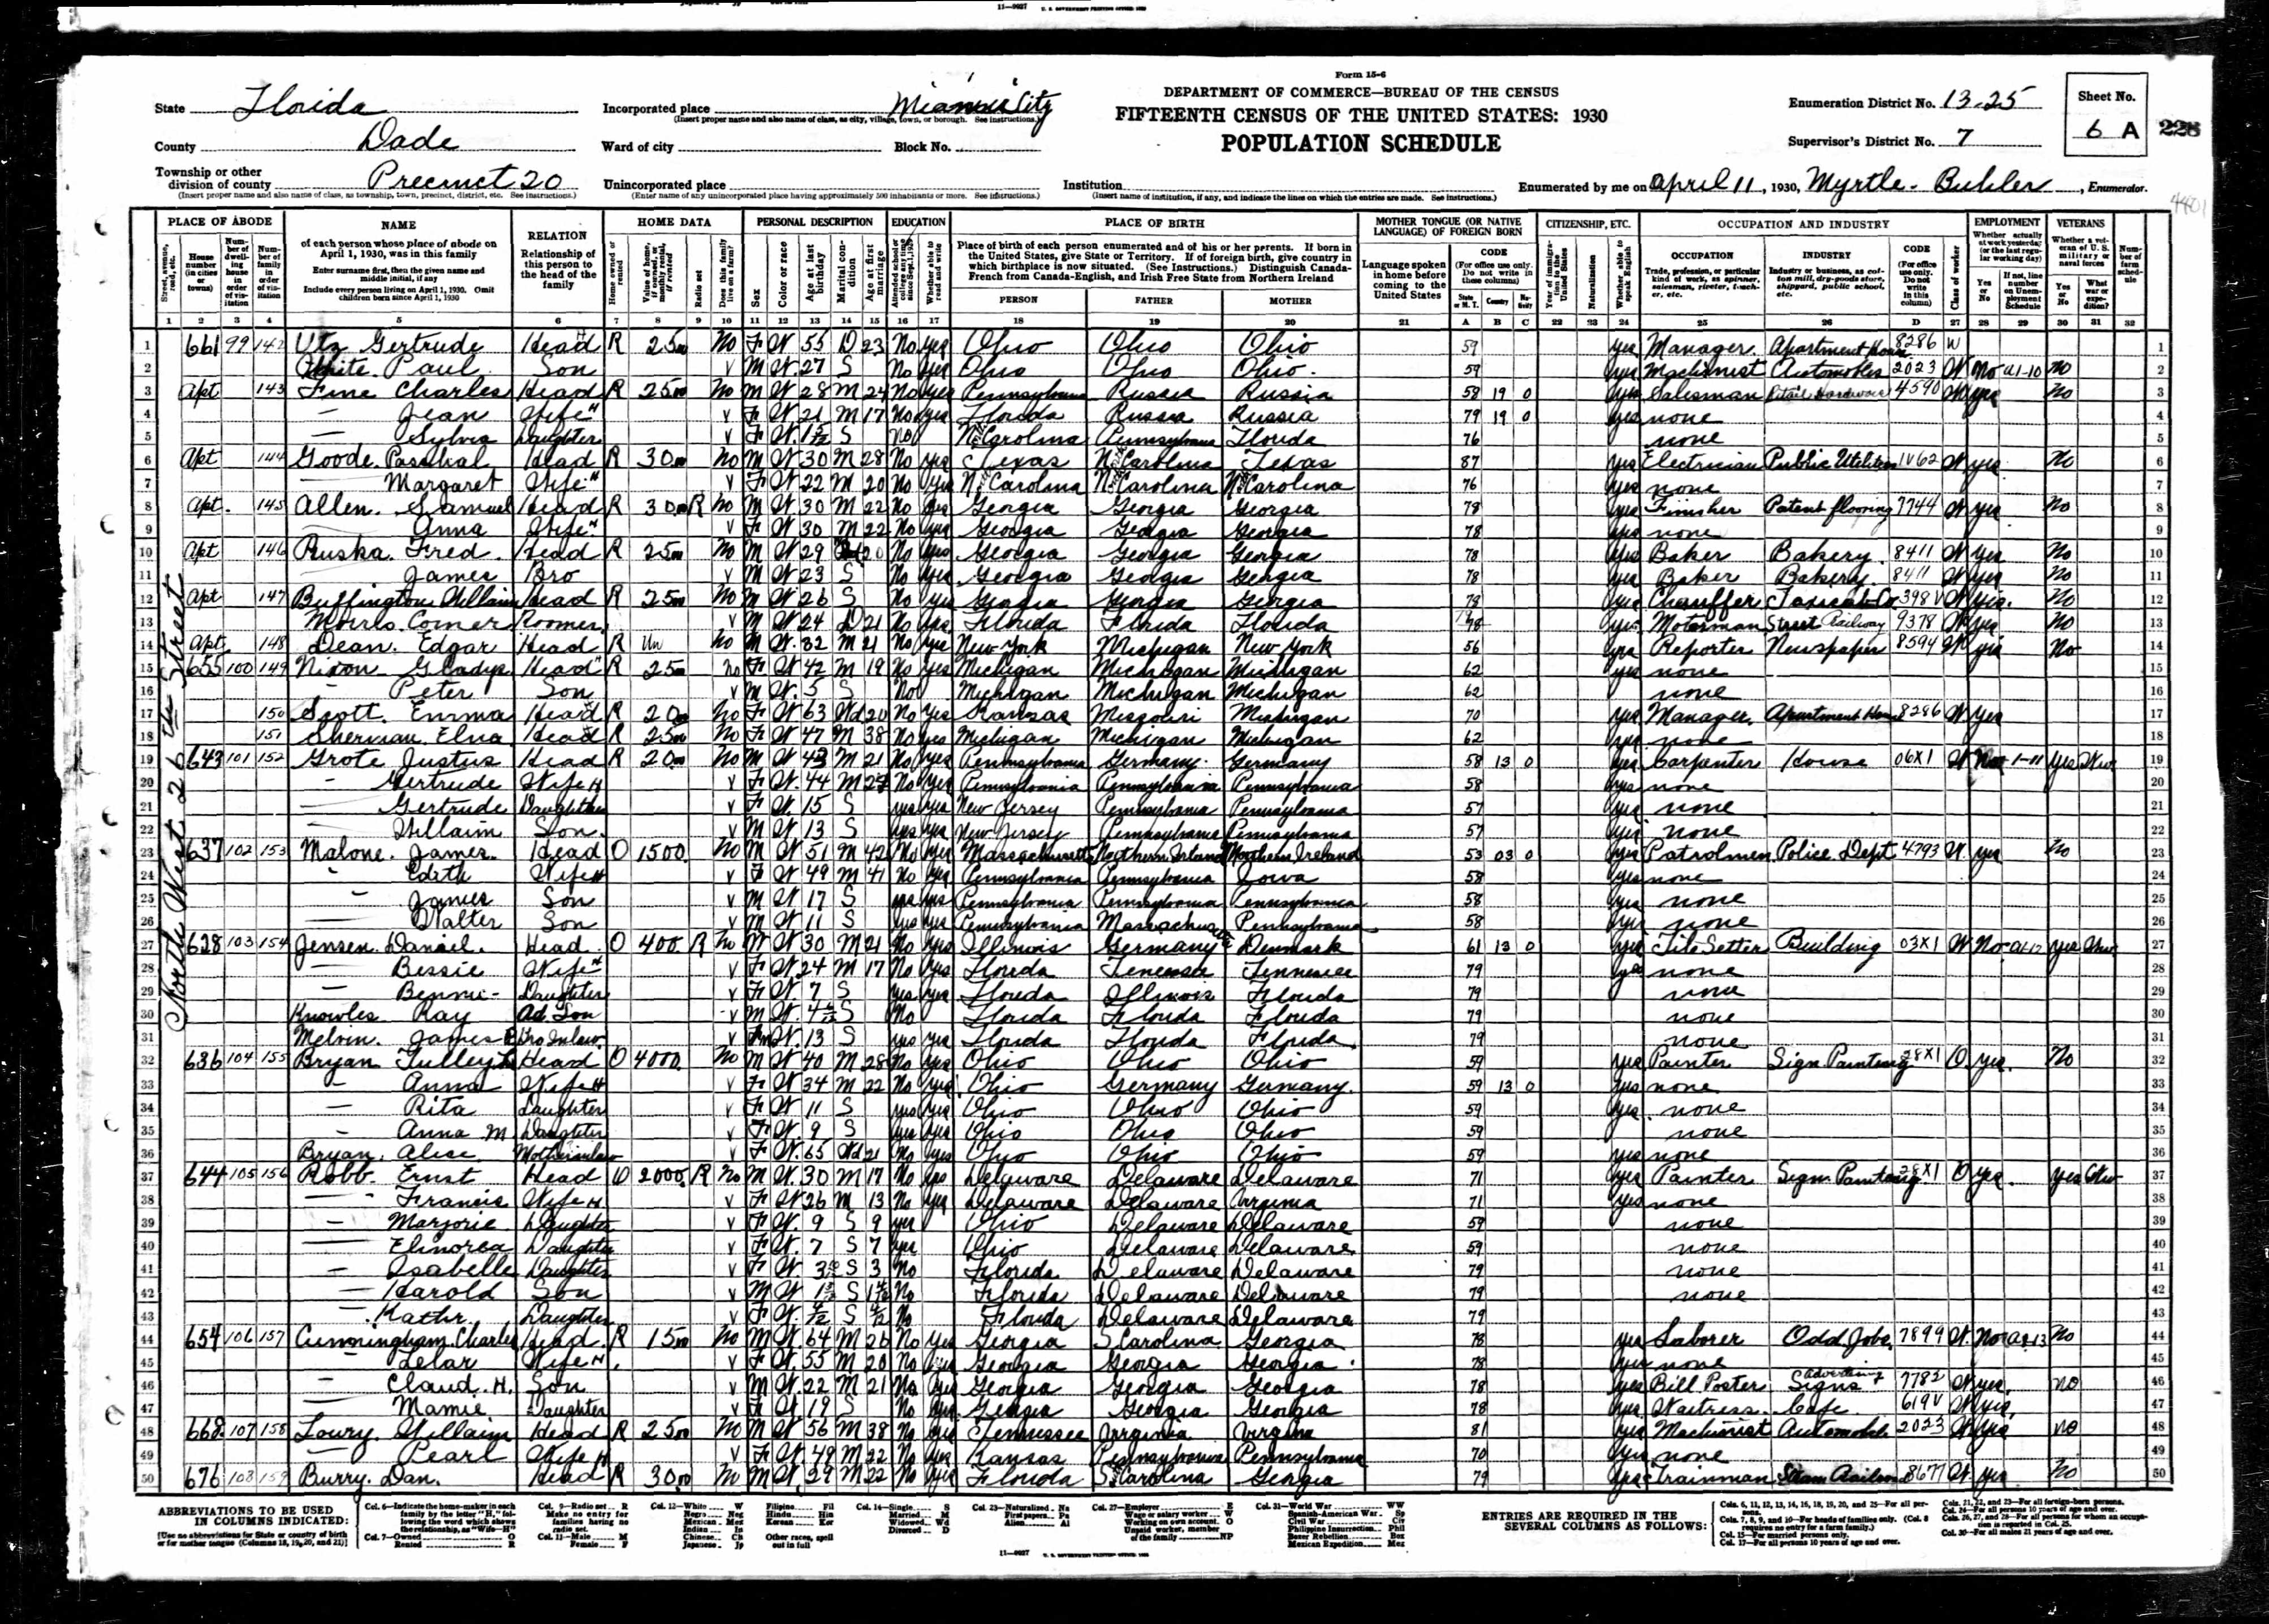 1930 US Census, Ray Knowles,line 30